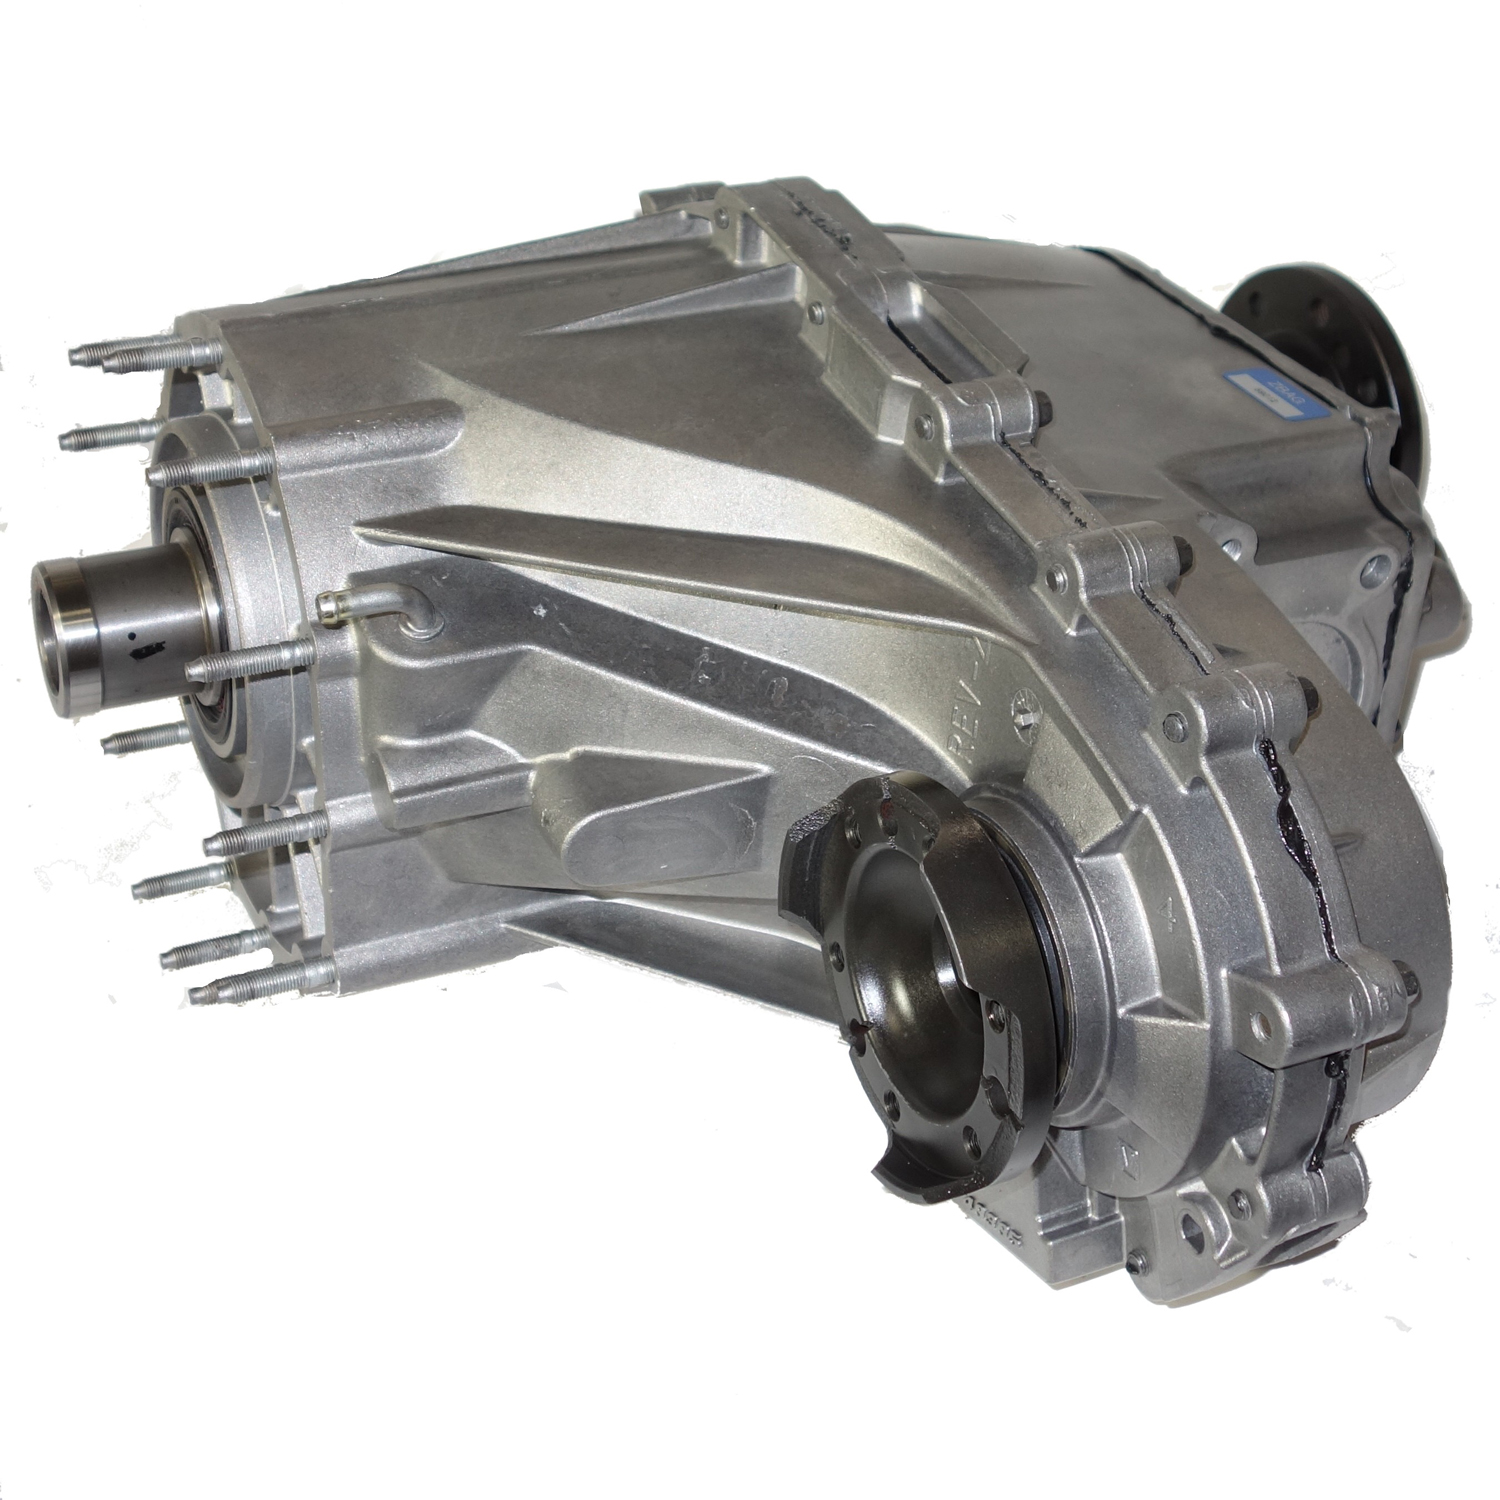 Remanufactured NP245 Transfer Case for Jeep 07-09 Grand Cherokee 3.0L